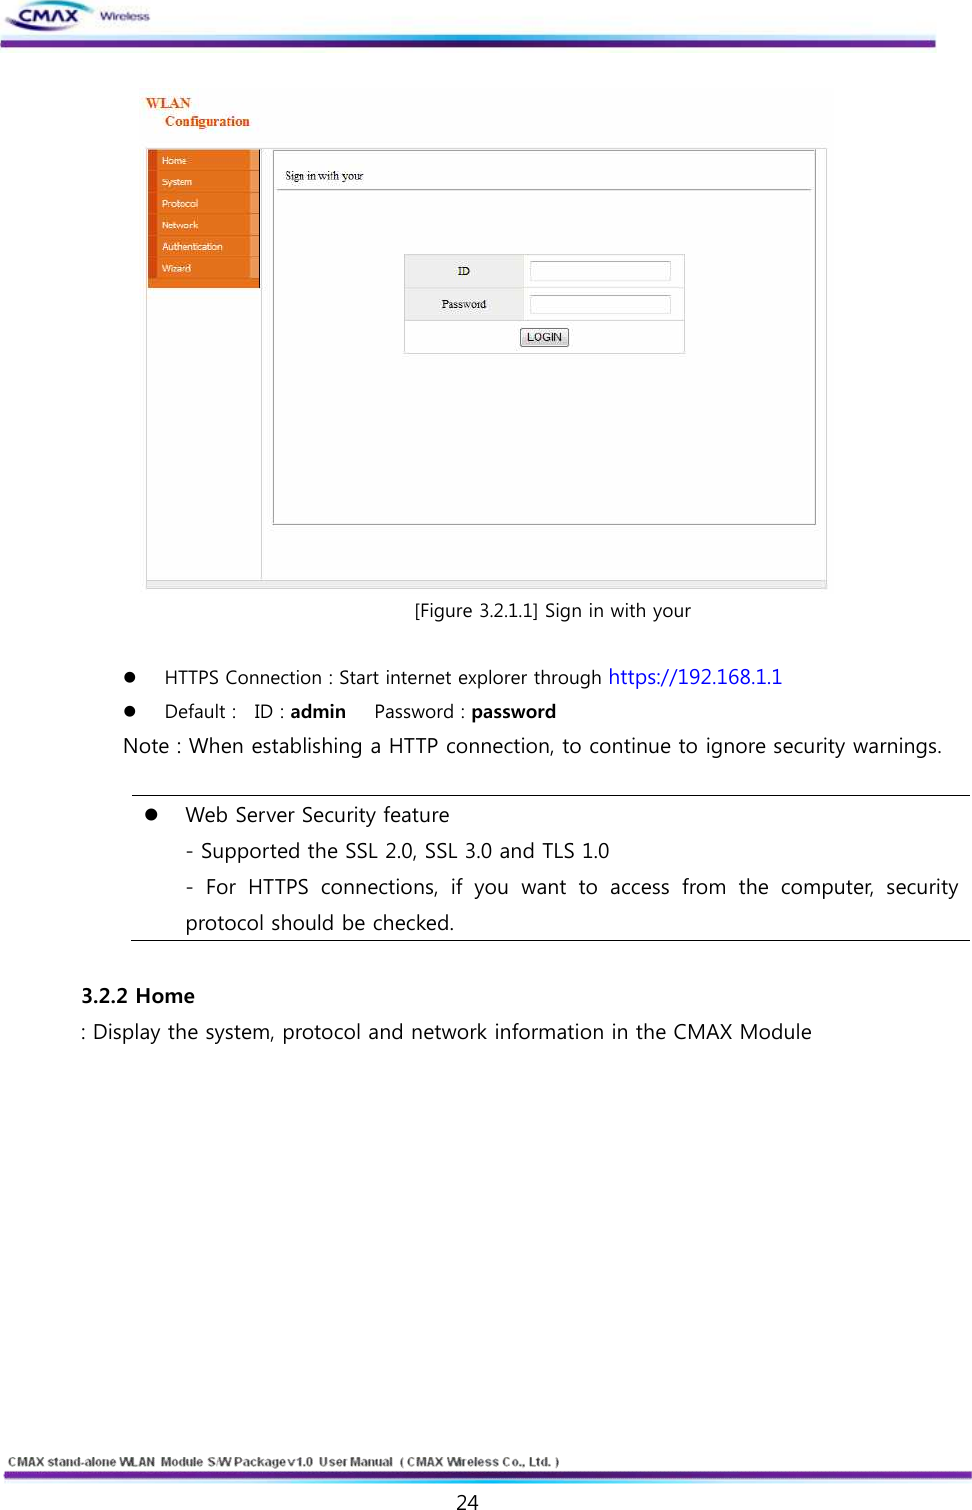   24  www.cmaxwireless.co.kr  [Figure 3.2.1.1] Sign in with your  l HTTPS Connection : Start internet explorer through https://192.168.1.1 l Default :    ID : admin      Password : password   Note : When establishing a HTTP connection, to continue to ignore security warnings.  l Web Server Security feature   - Supported the SSL 2.0, SSL 3.0 and TLS 1.0   -  For  HTTPS  connections,  if  you  want  to  access  from  the  computer,  security protocol should be checked.    3.2.2 Home : Display the system, protocol and network information in the CMAX Module  